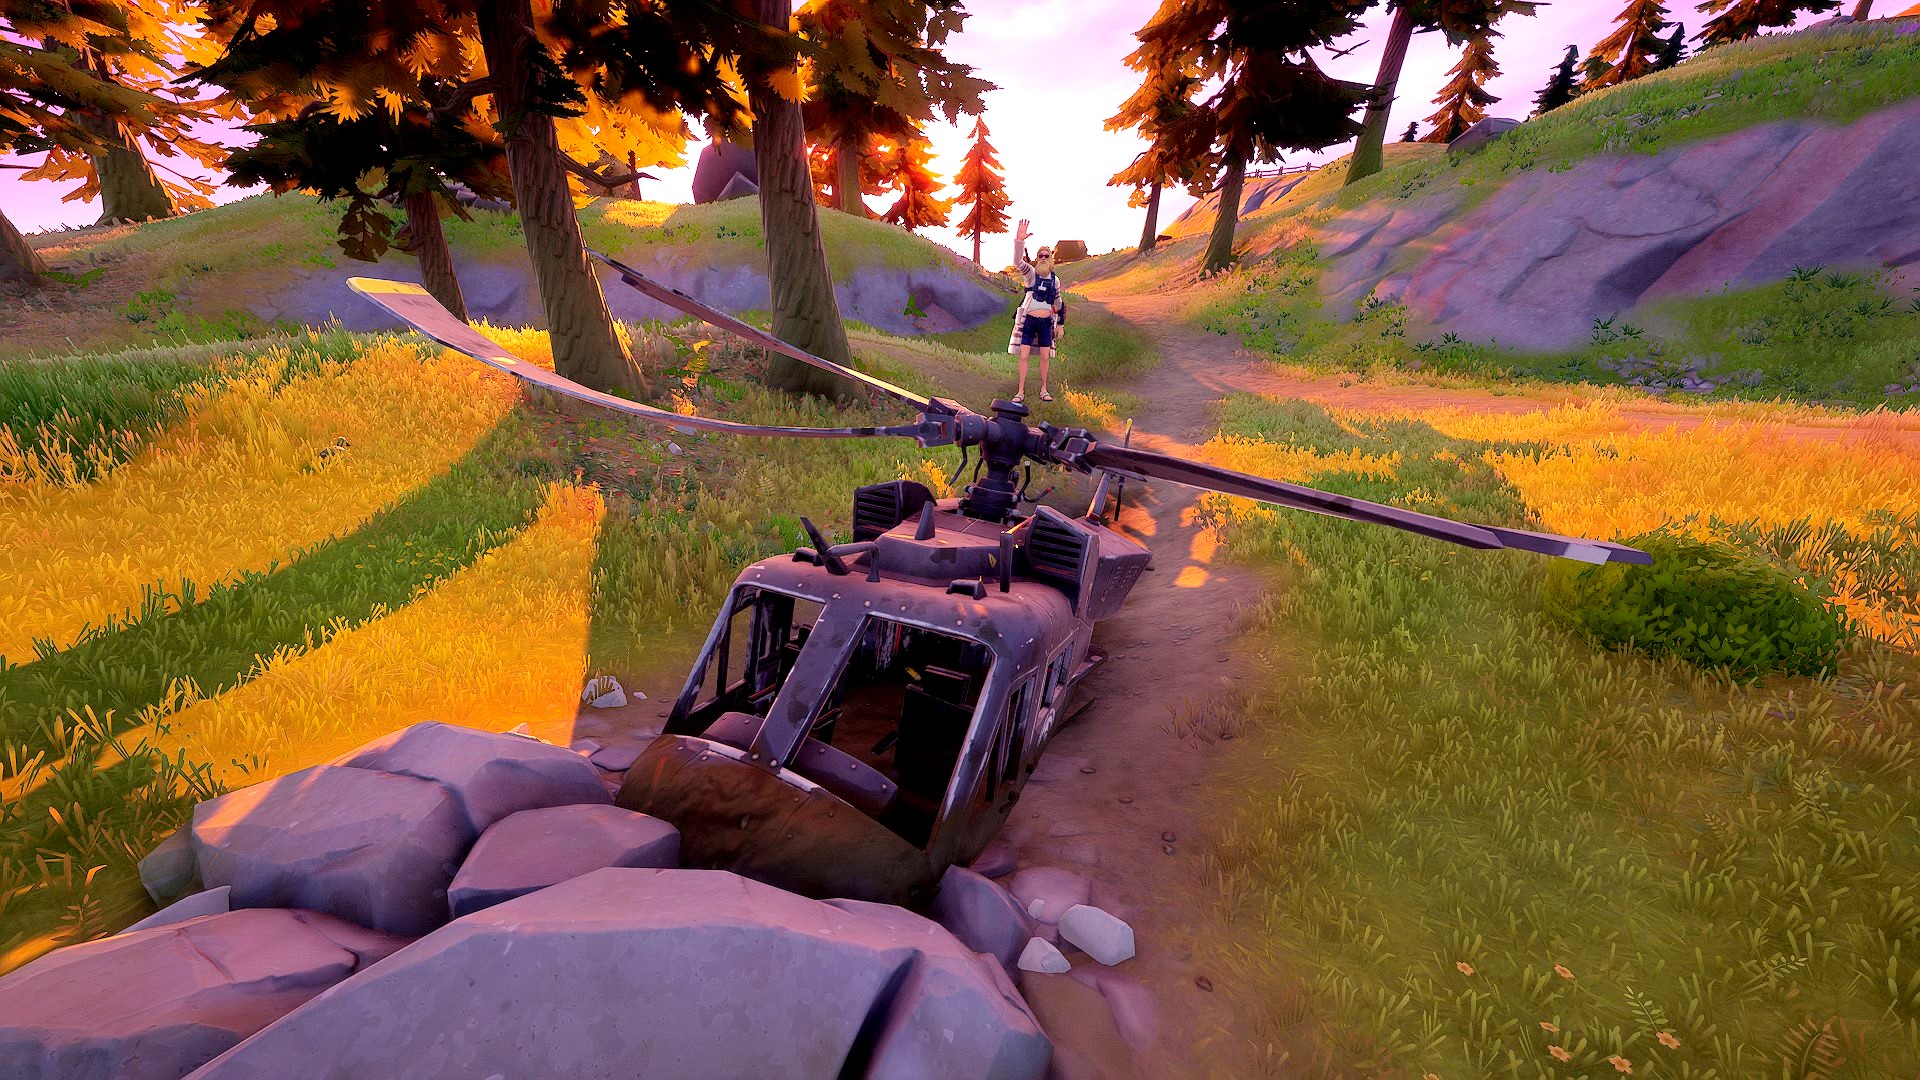  Where to investigate a downed black helicopter in Fortnite 